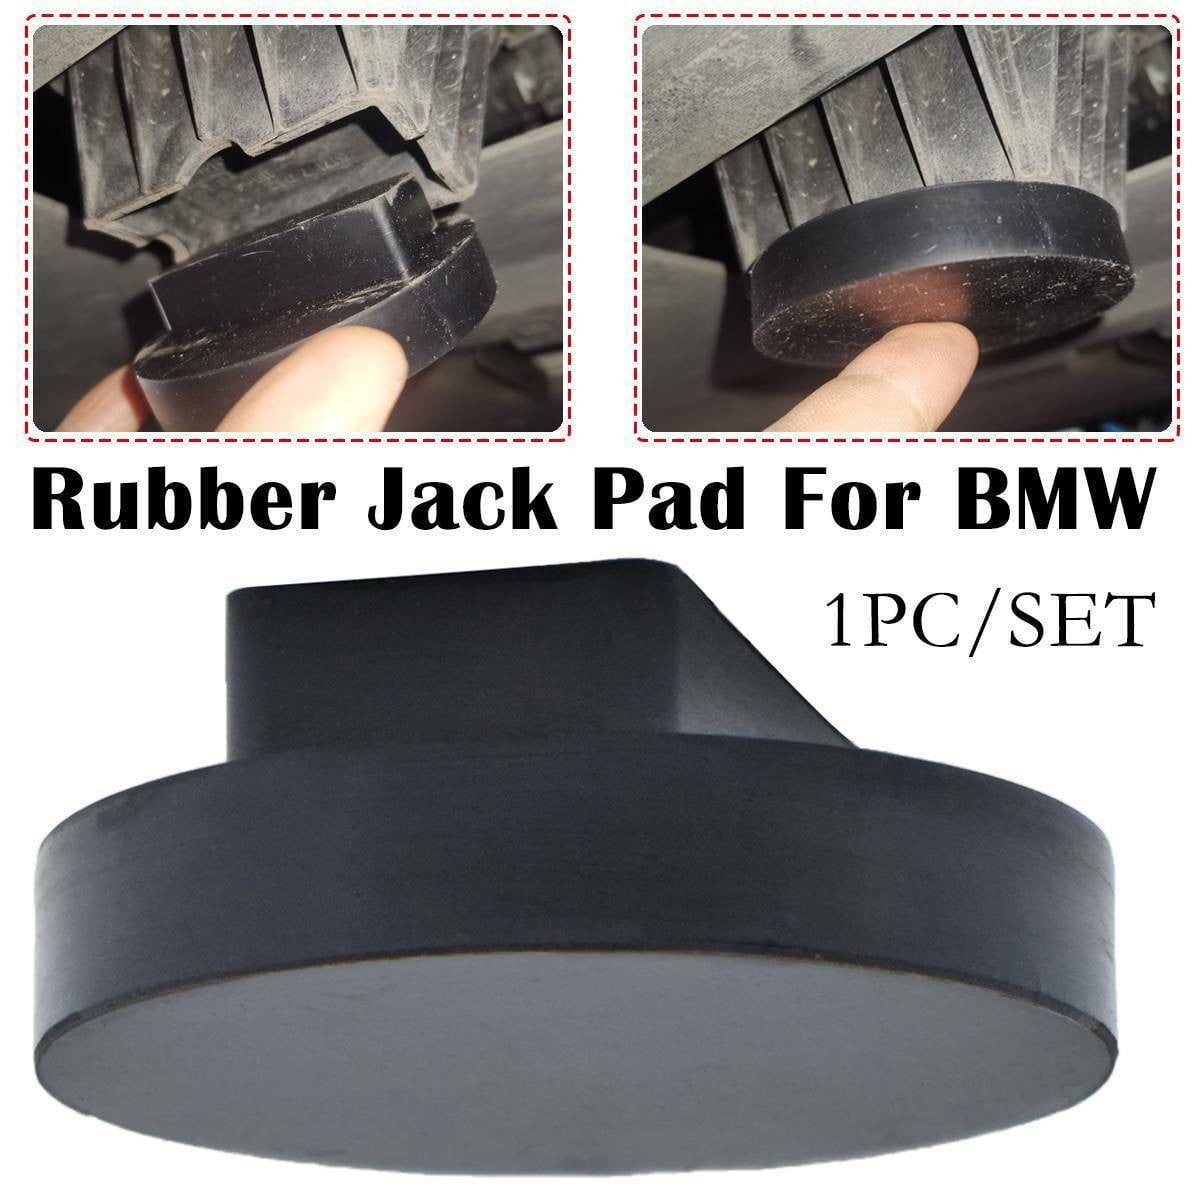 2Pcs Car Rubber Jacking Jack Pad Adapter Tool For BMW X Series E84 X1 X3 E83 F25 